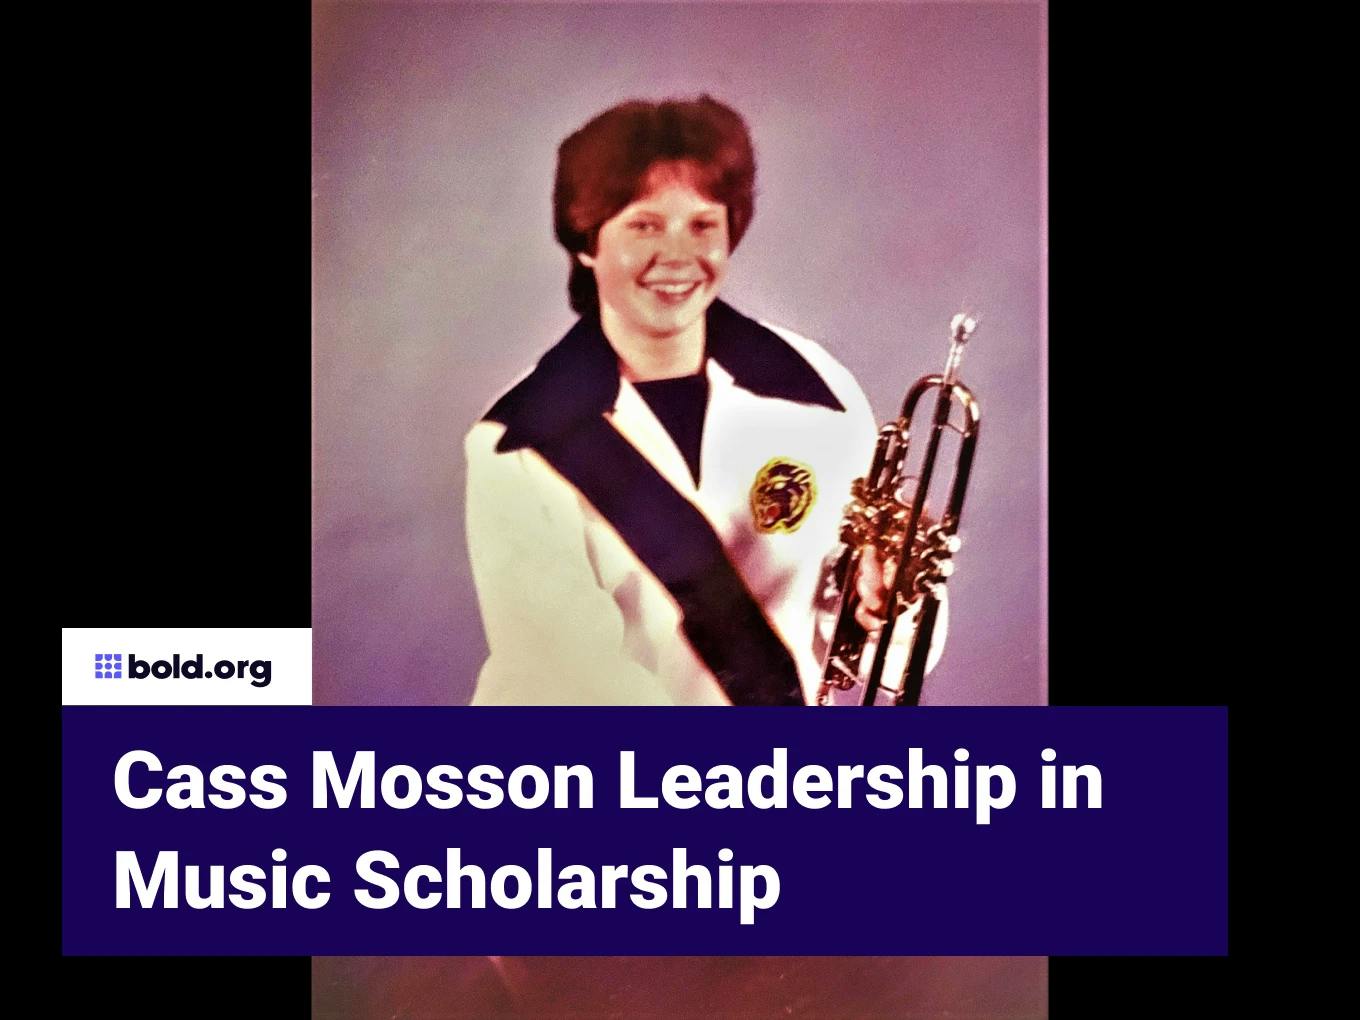 Cass Mosson Leadership in Music Scholarship